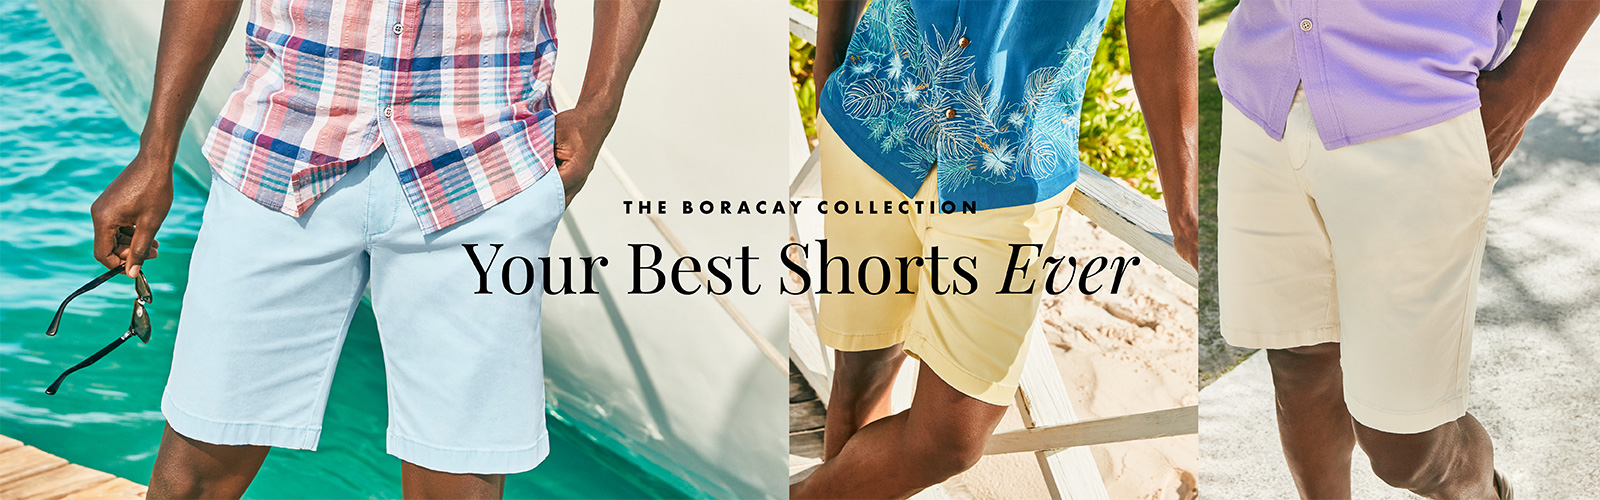 The Boracay Collection - Your Best Shorts Ever